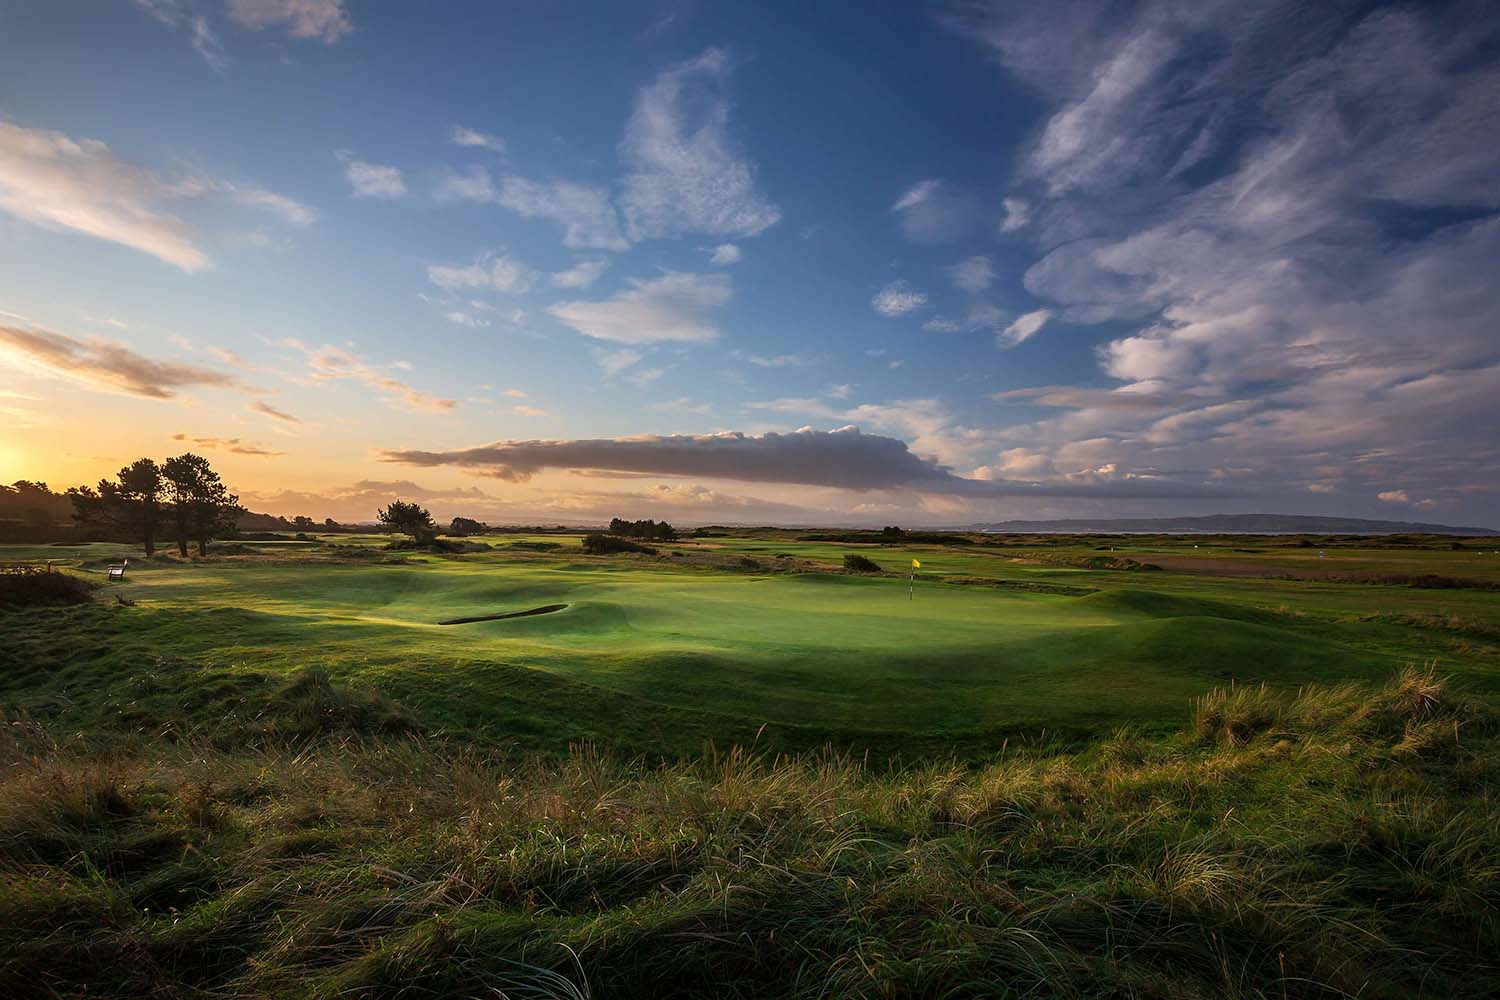 Portland Course at Royal Troon